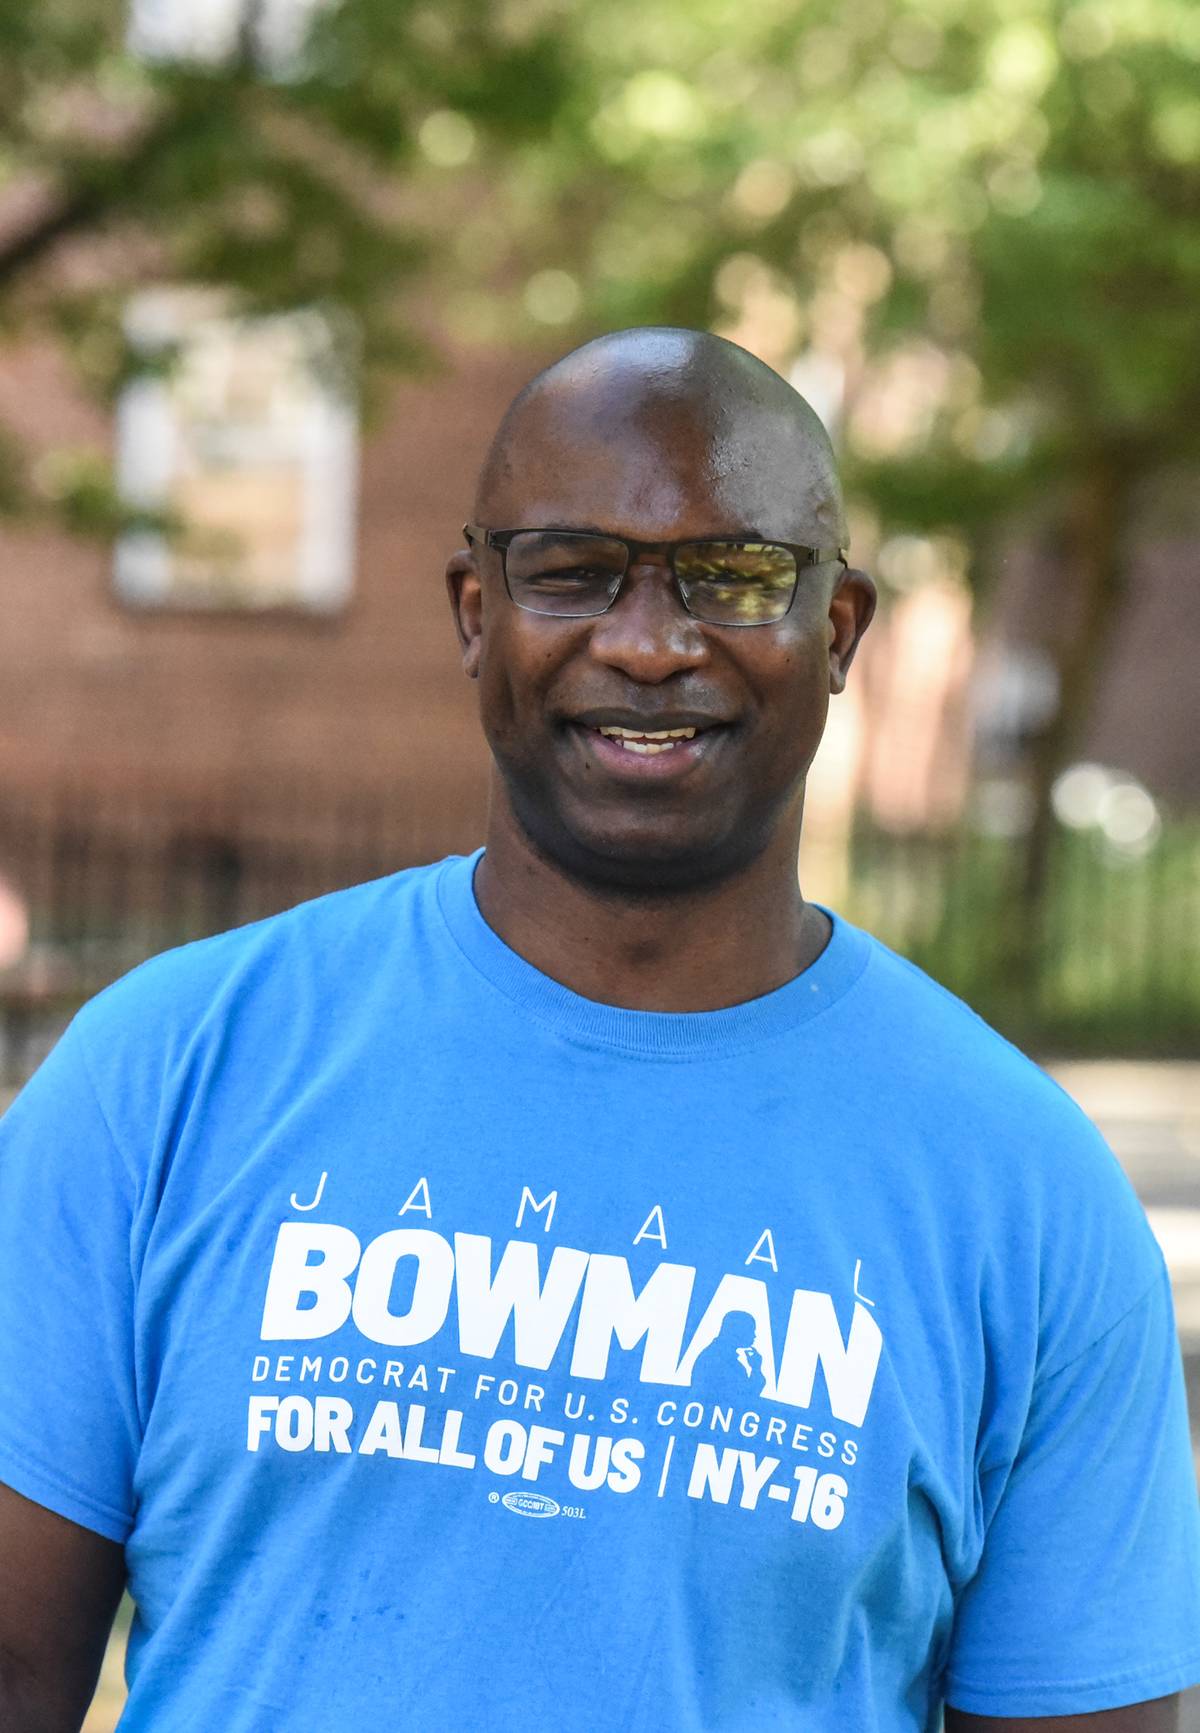 Jamaal Bowman in New York City during the Democratic primary campaign for NY-16, June 2020